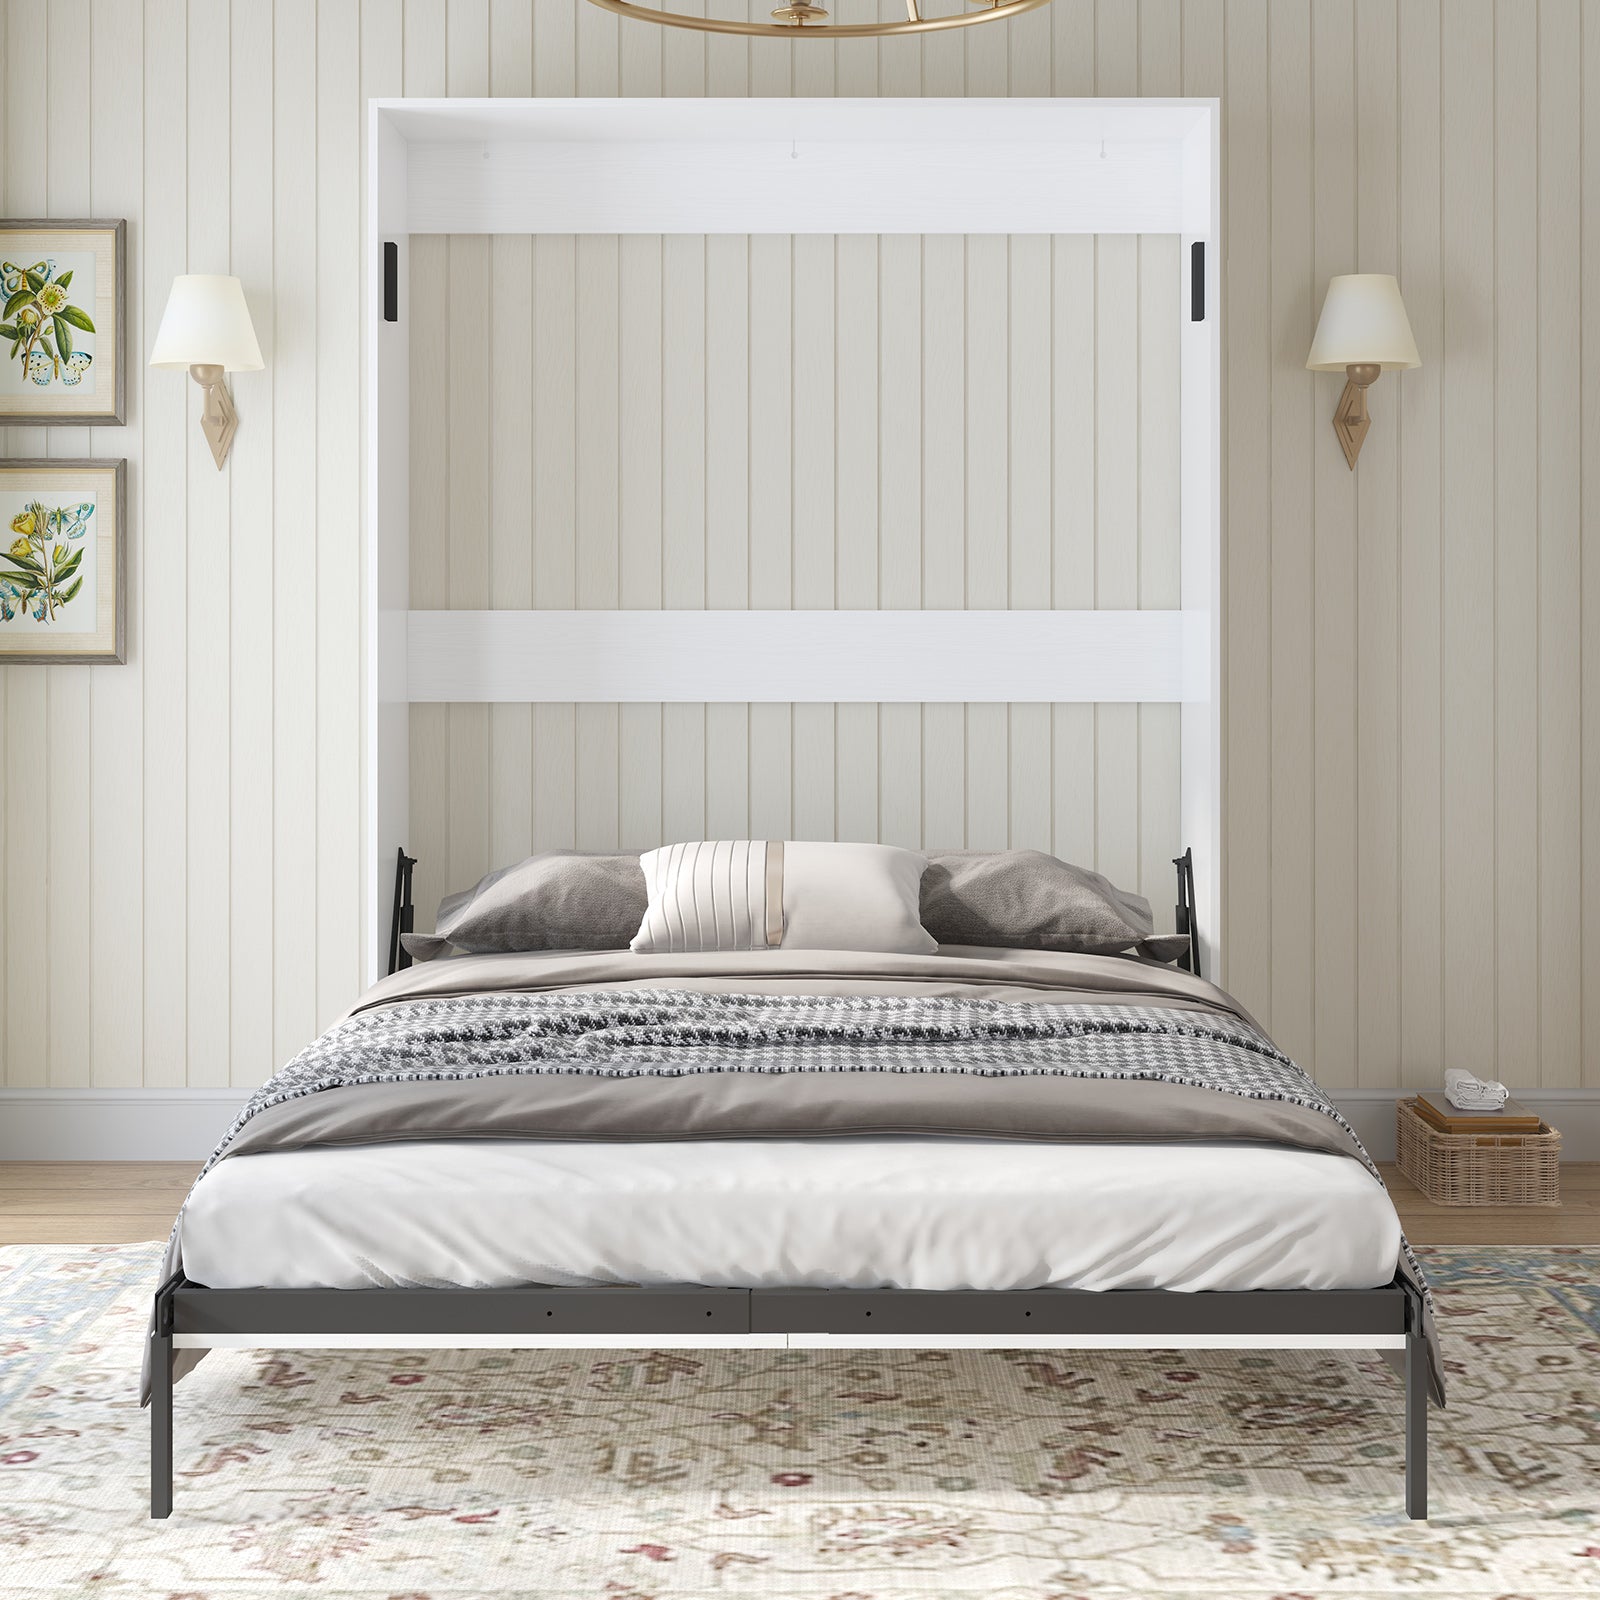 Mjkone Murphy Bed with Wardrobe, Folding Wall Bed for Bedroom, Fold Up Murphy Bed Cabinet, Queen Murphy Chest Bed Can Be Folded into a Cabinet, Storage Bed, Space-Saving Design